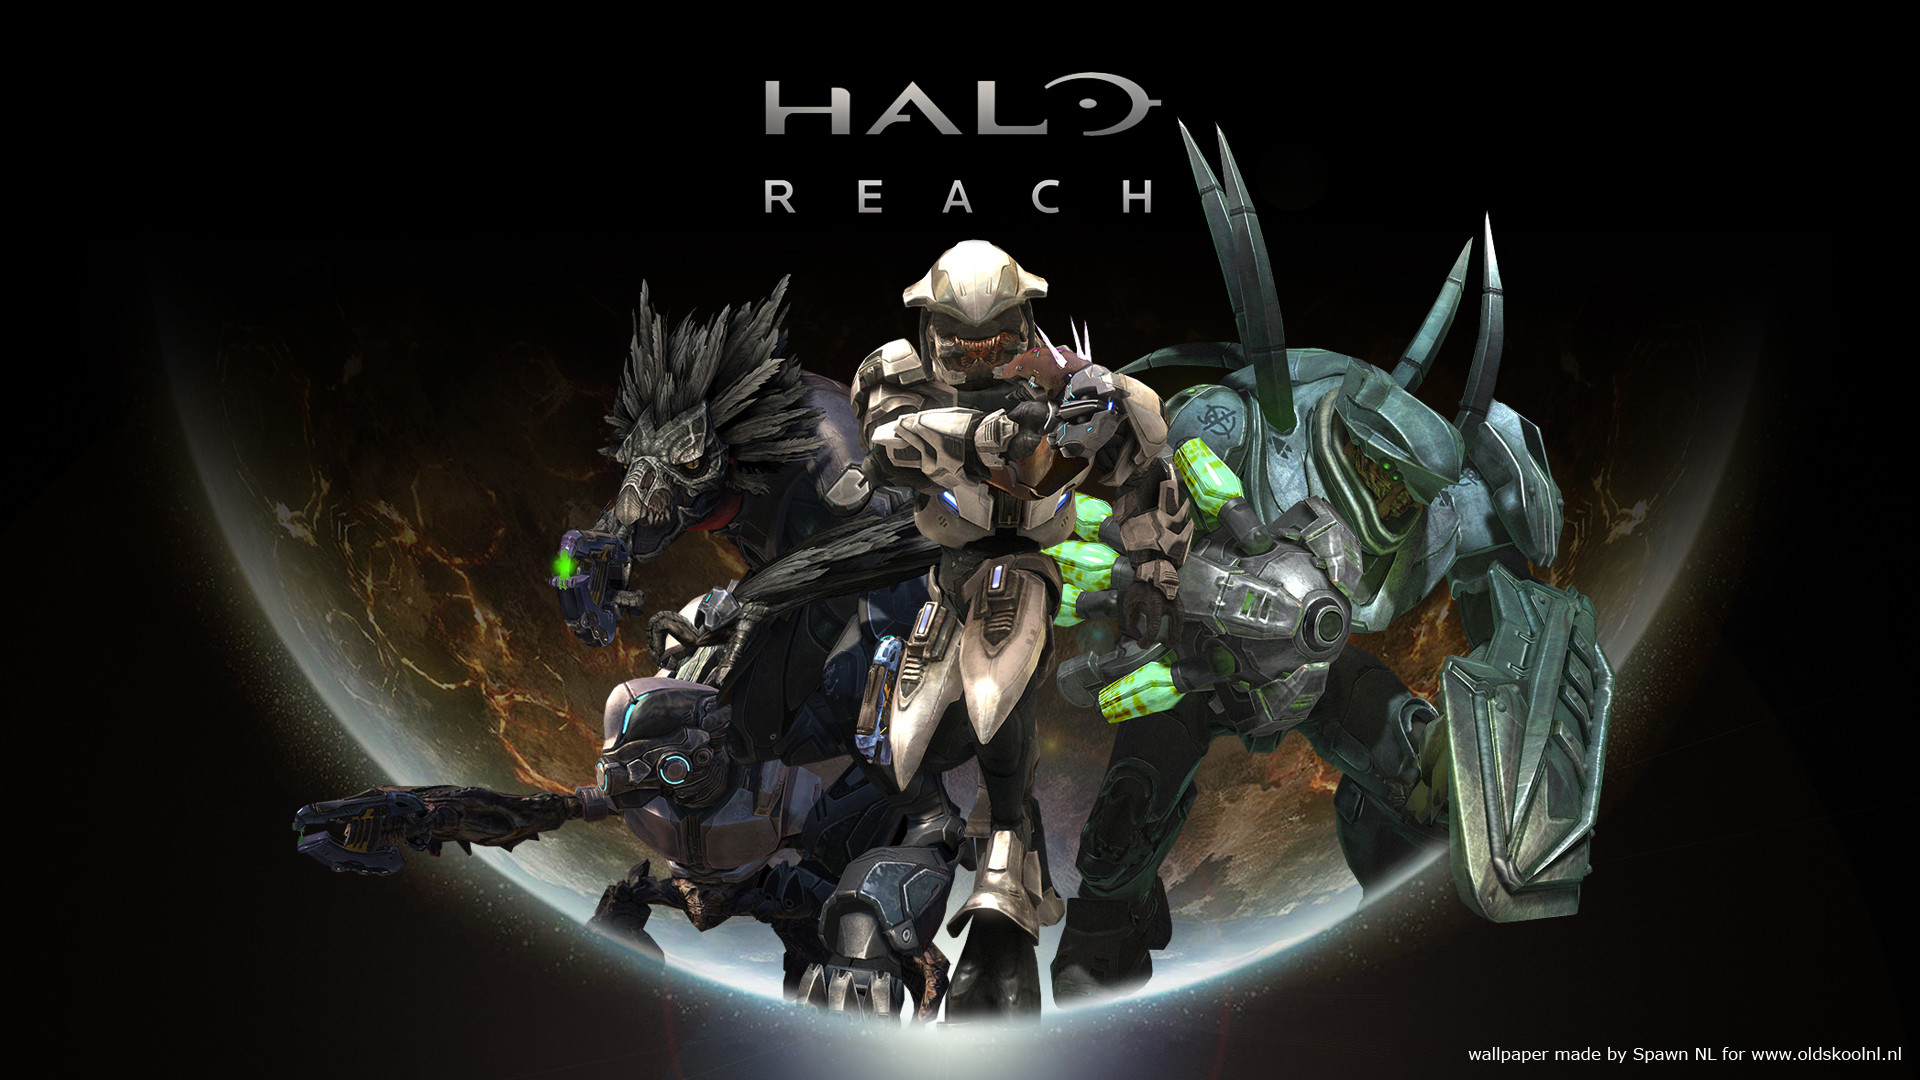 1920x1080 Halo Reach wallpapers HD free - 470162